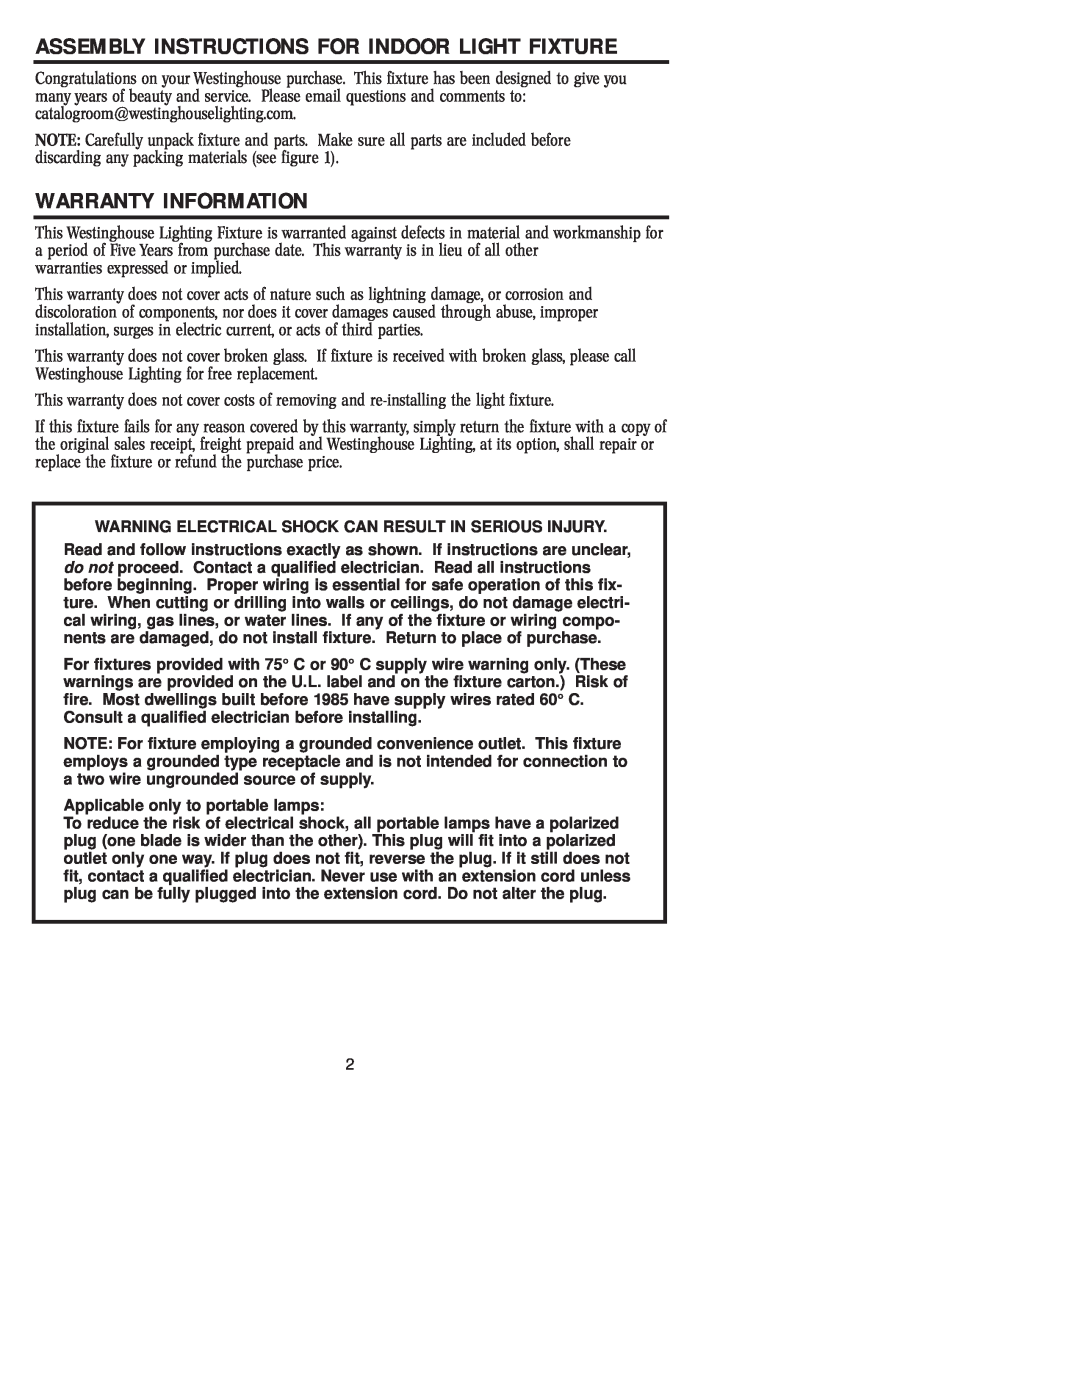 Westinghouse W-231 owner manual Warranty Information, Assembly Instructions For Indoor Light Fixture 